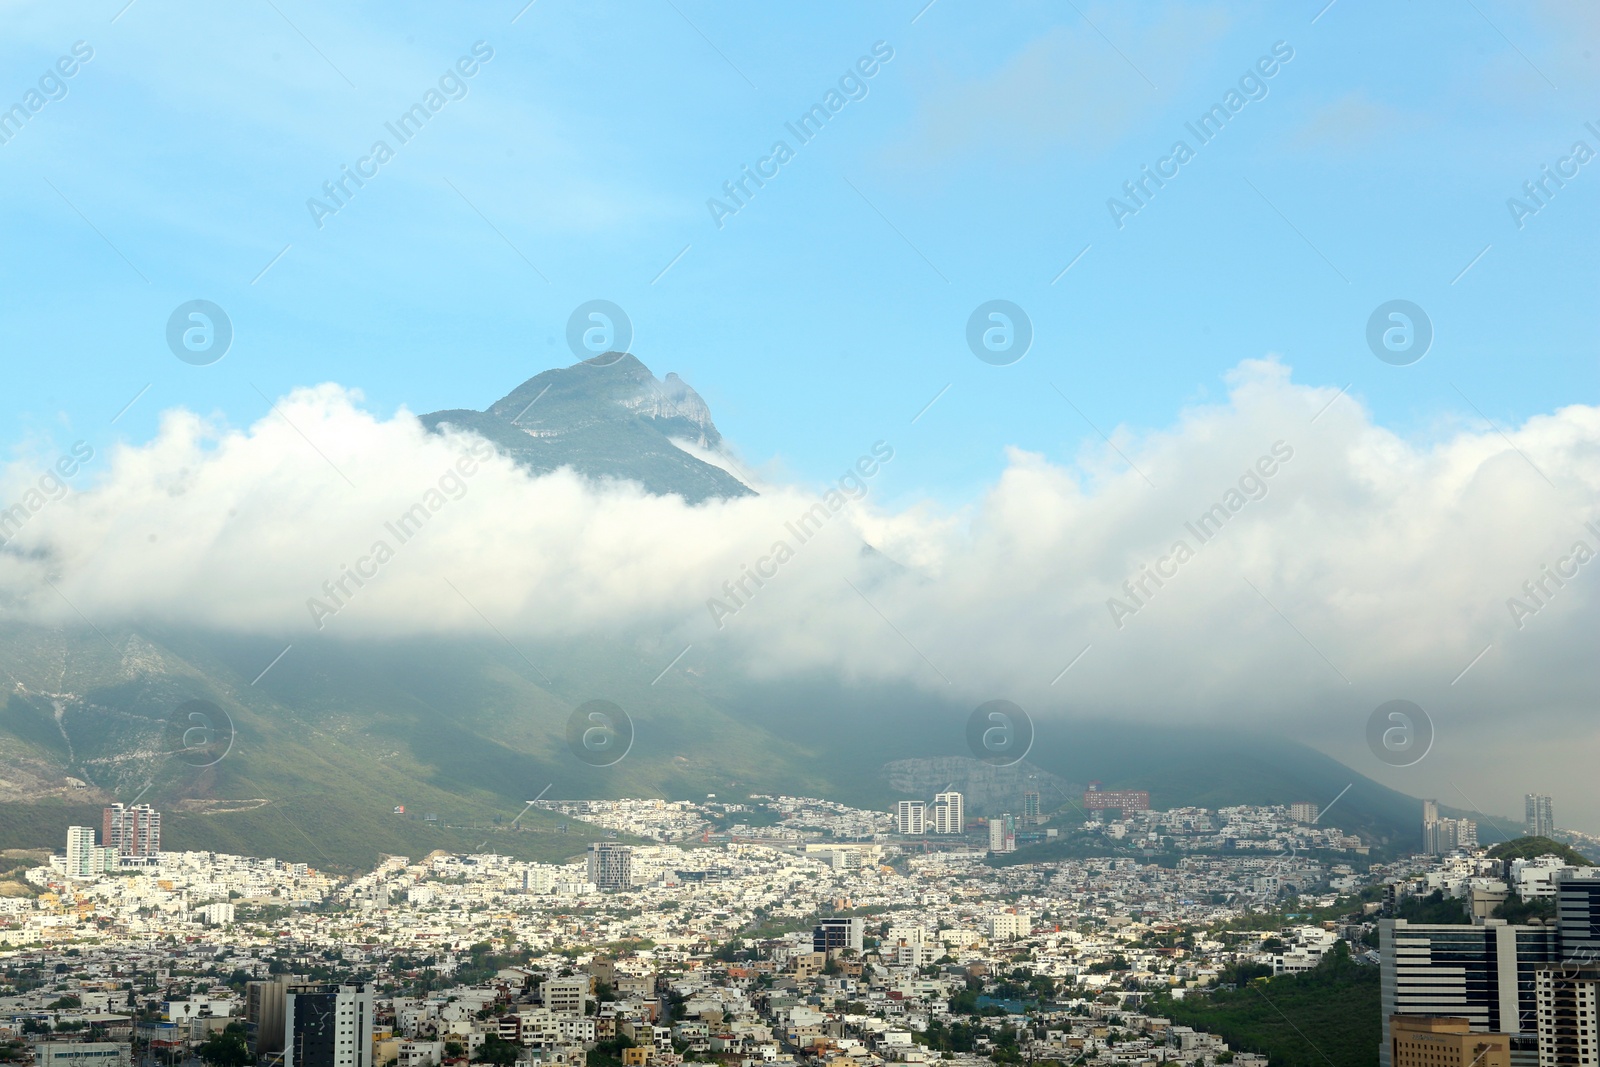 Photo of Picturesque view of beautiful cityscape near mountain